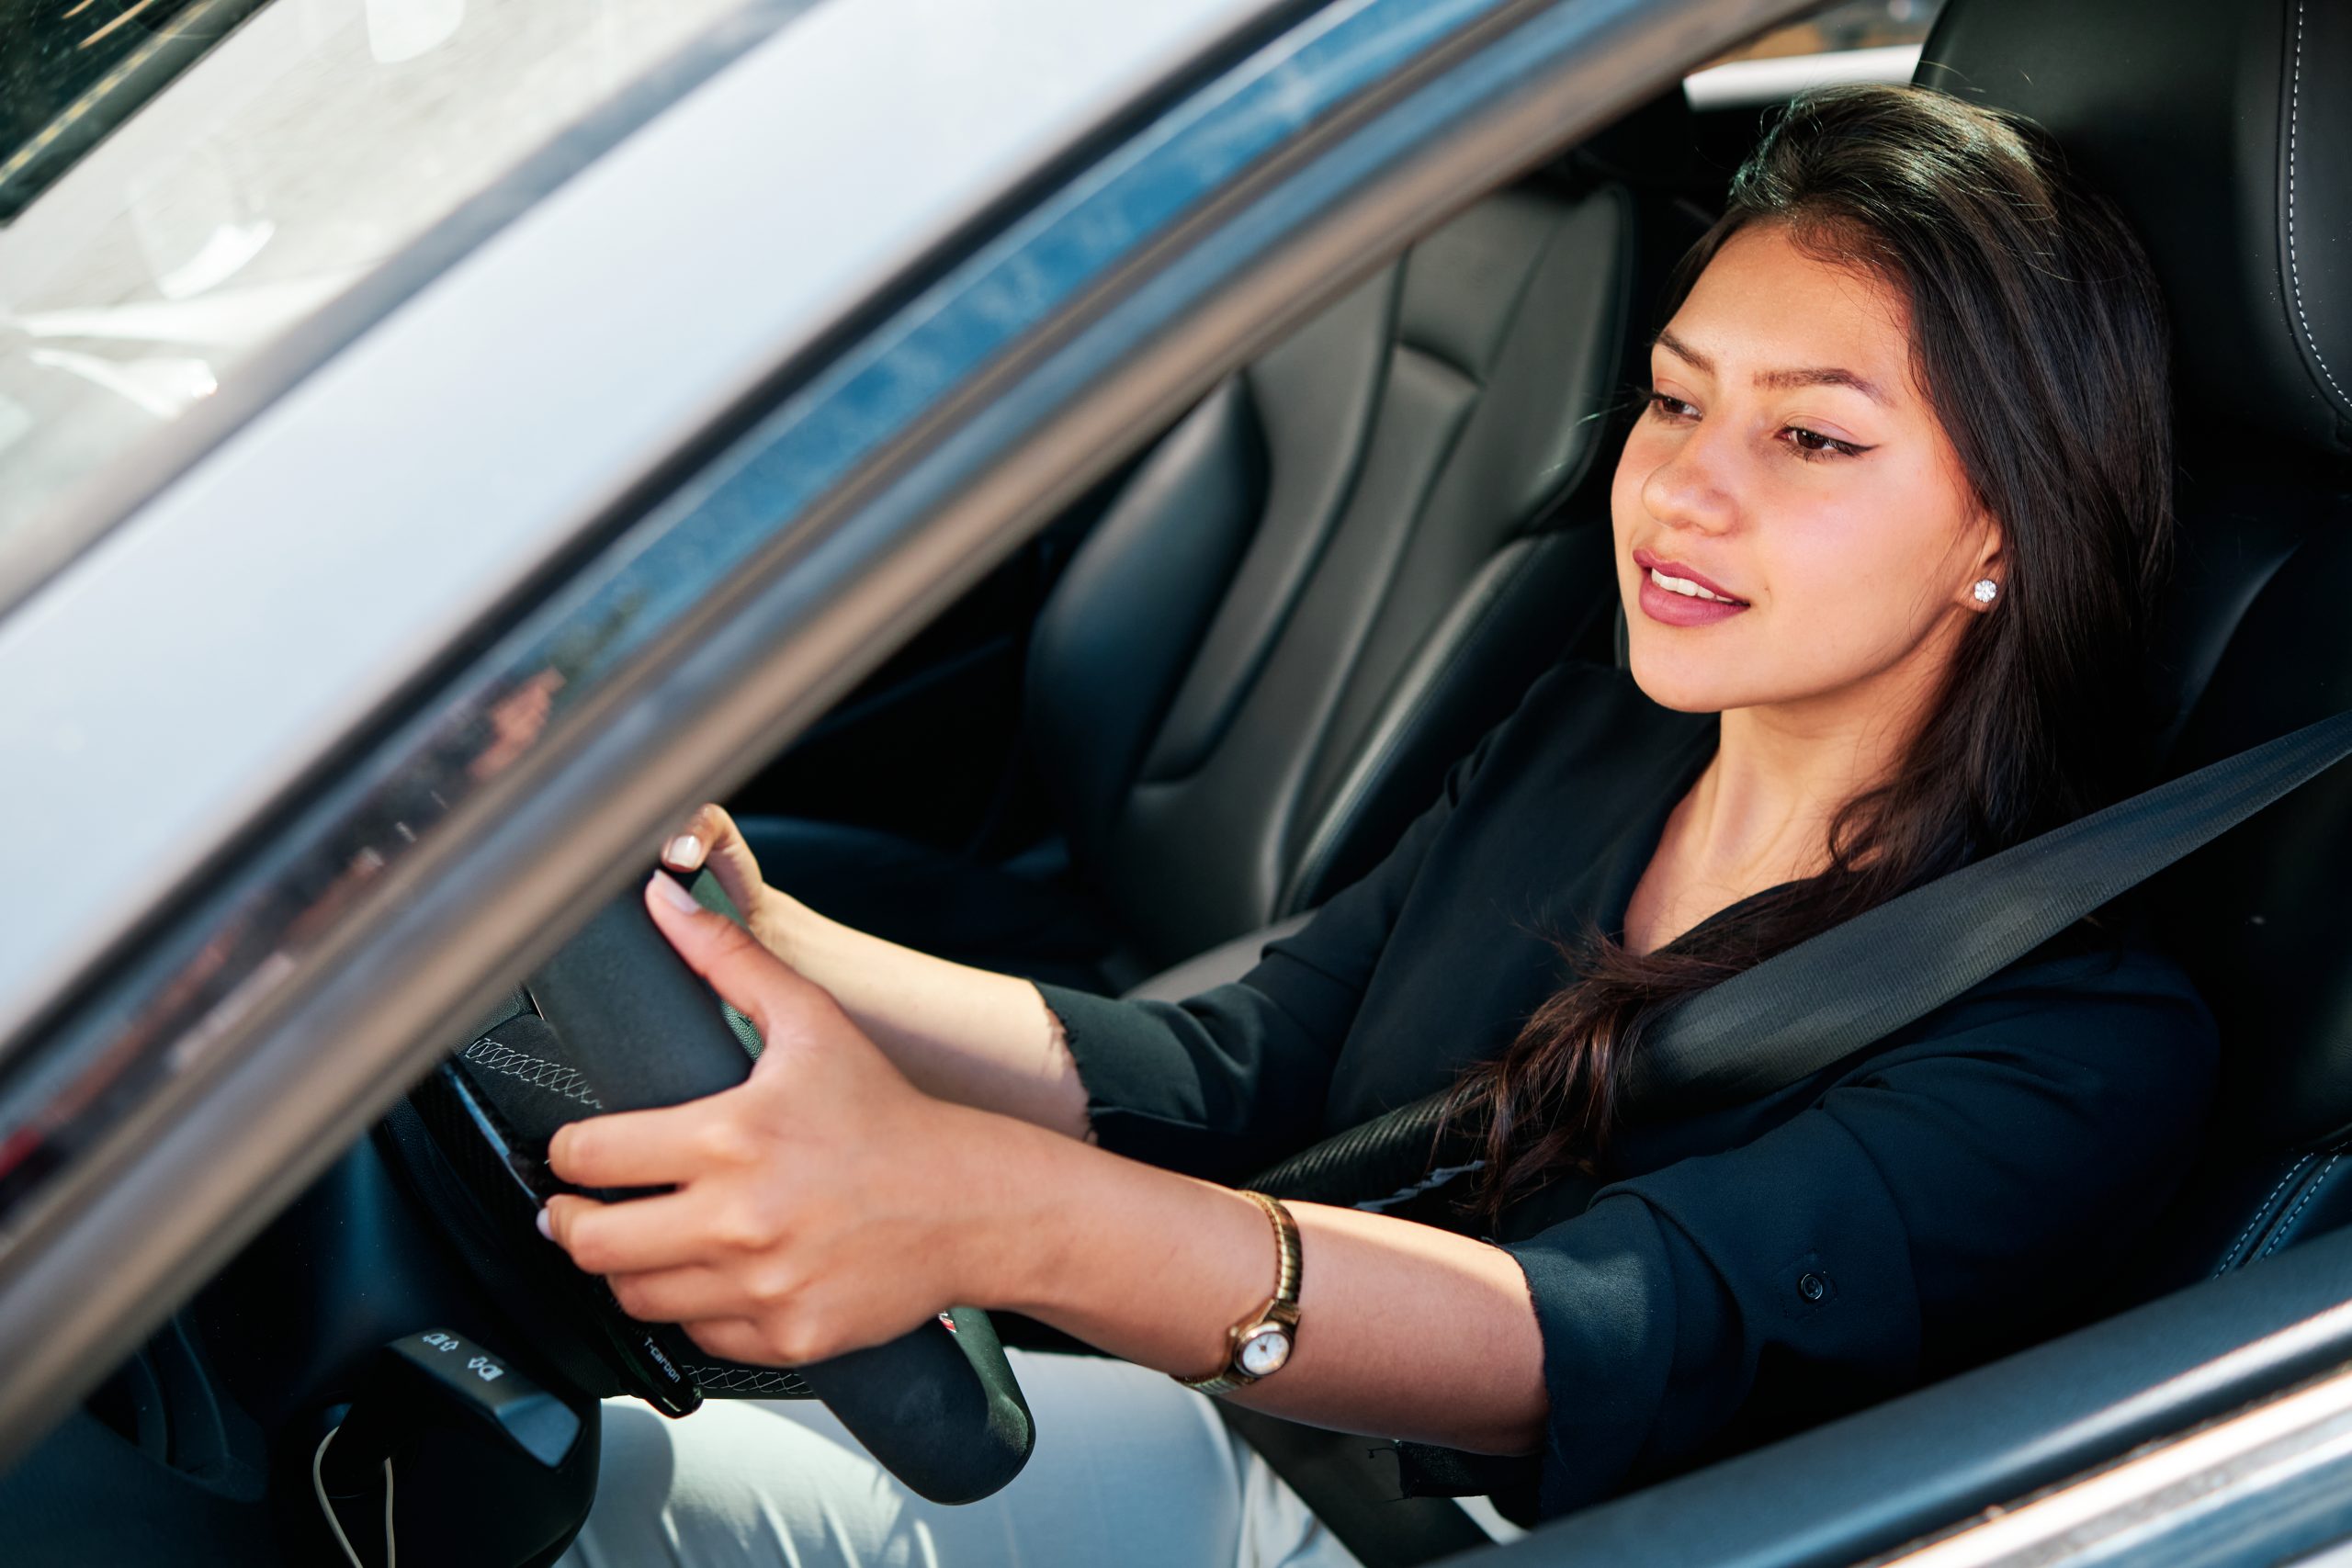 Tips to combat fatigue behind the wheel